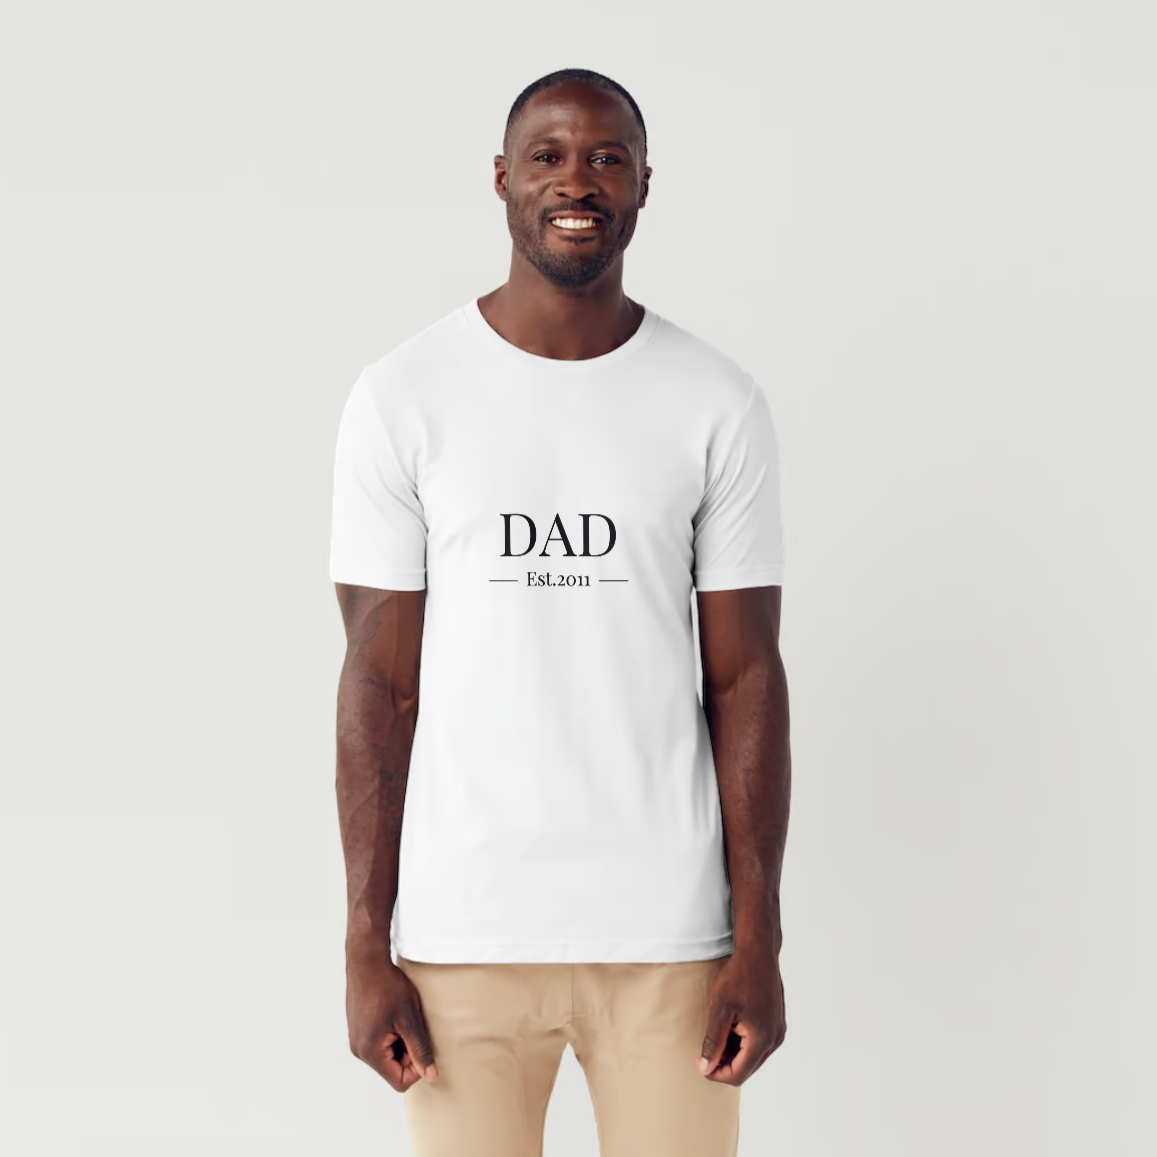 DAD est 2011 T-Shirt - Personalized Father's Day Gift